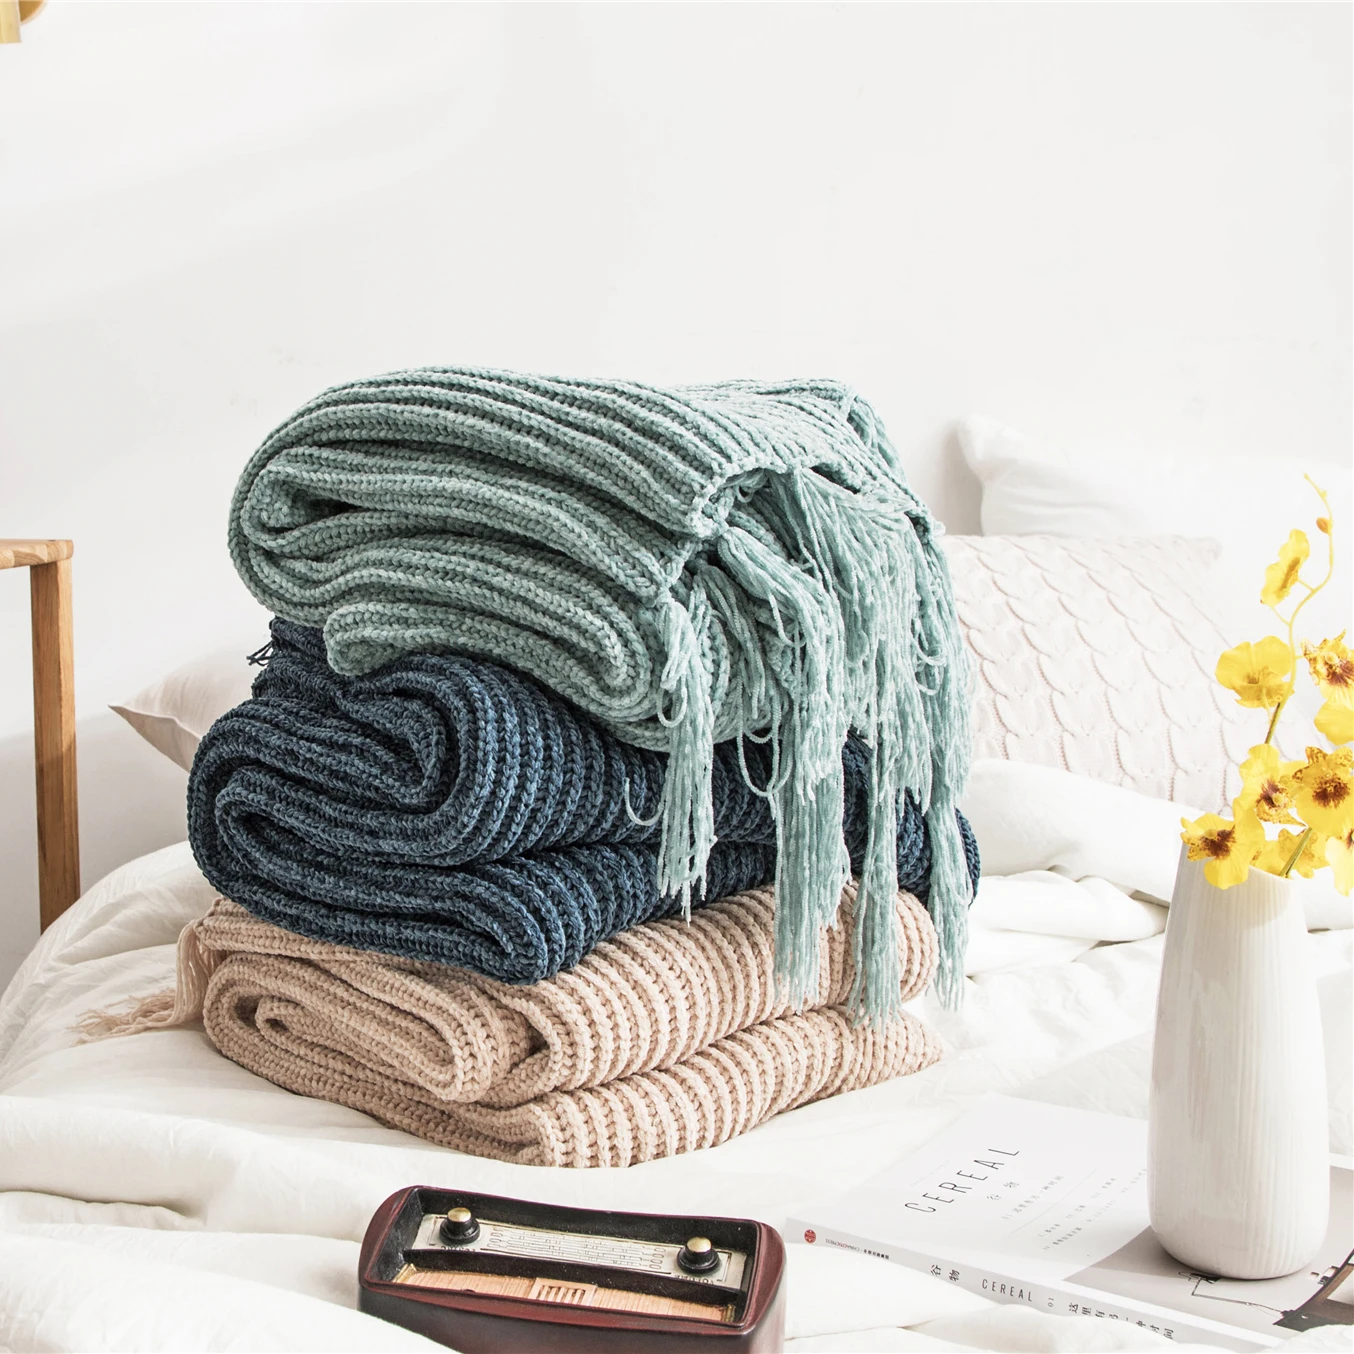 Inyahome Tassels Throw Knitted Blankets Fashion Fringe Cozy Warm Elegant Causal Plaid For Couch Sofa Bed Farmhouse Decor Blanket